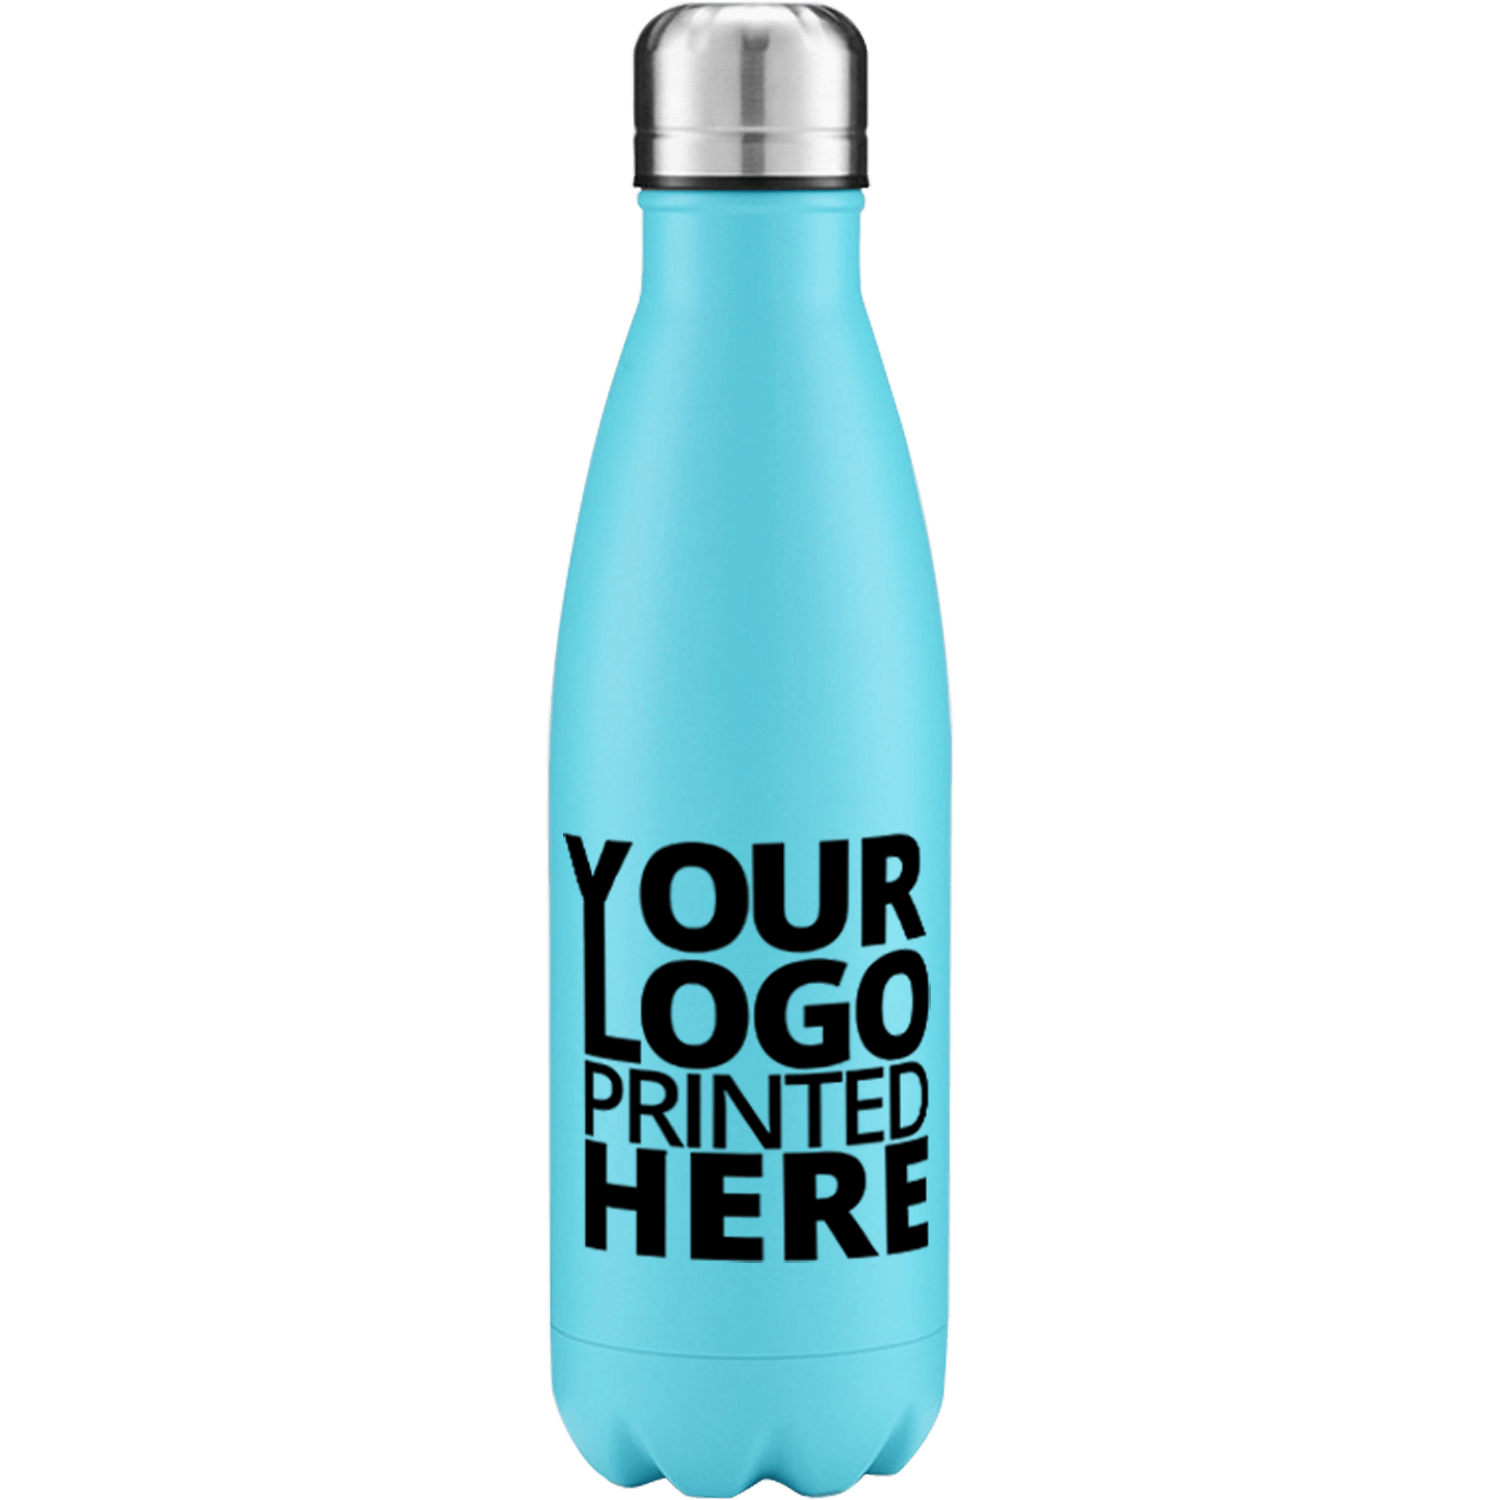 Download 500Ml Dishwashing Bottle Mockup - Buy Your 500ml Hot Cold Water Bottle Board And Beach Branded ...